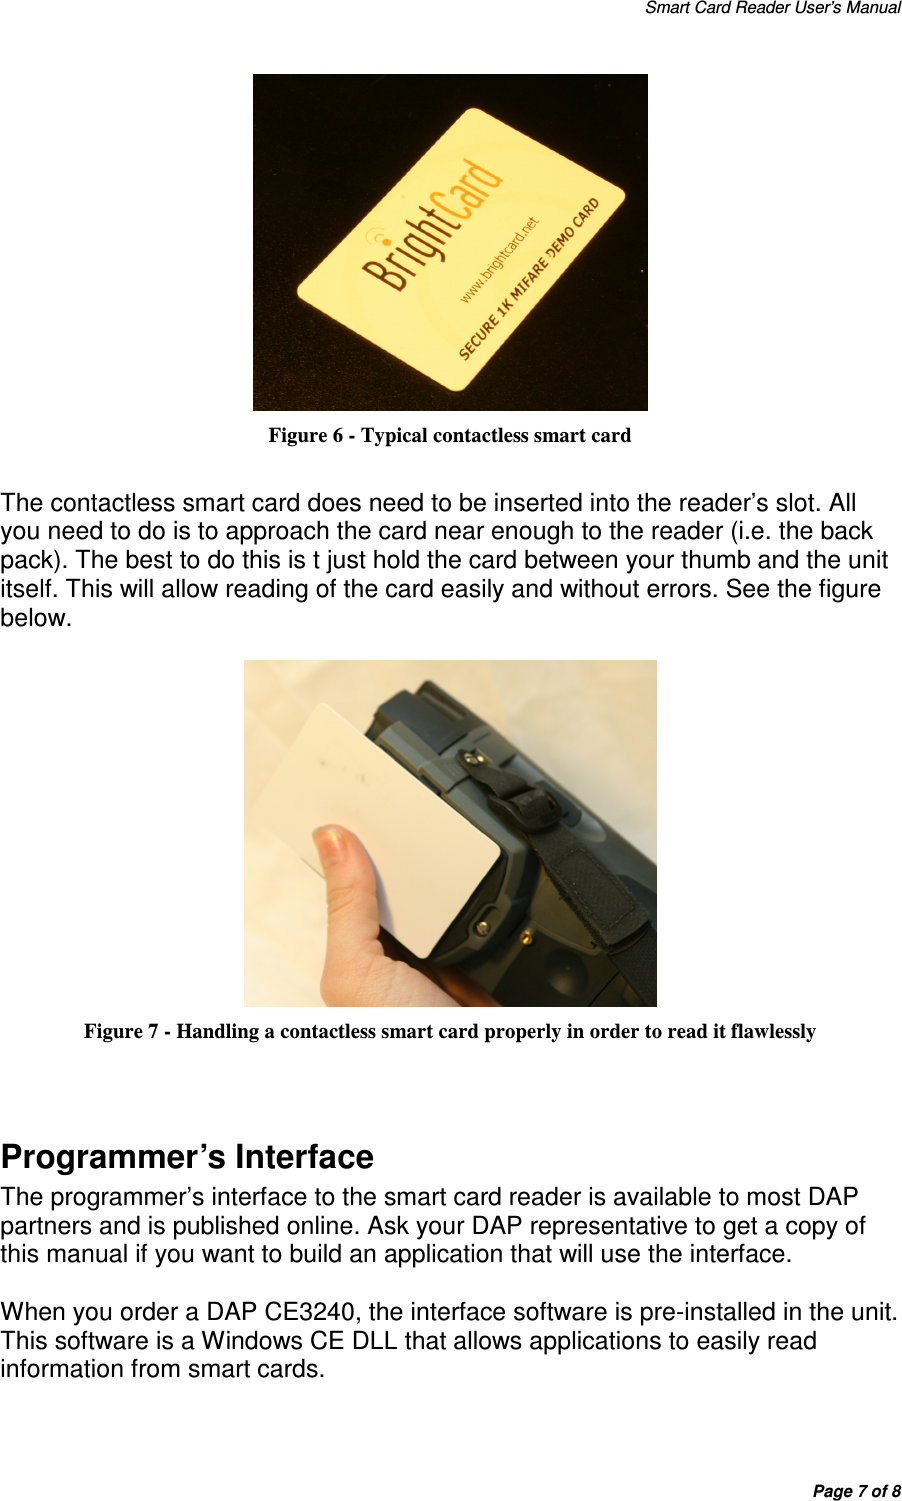 Smart Card Reader User’s Manual Page 7 of 8  Figure 6 - Typical contactless smart card  The contactless smart card does need to be inserted into the reader’s slot. All you need to do is to approach the card near enough to the reader (i.e. the back pack). The best to do this is t just hold the card between your thumb and the unit itself. This will allow reading of the card easily and without errors. See the figure below.   Figure 7 - Handling a contactless smart card properly in order to read it flawlessly   Programmer’s Interface The programmer’s interface to the smart card reader is available to most DAP partners and is published online. Ask your DAP representative to get a copy of this manual if you want to build an application that will use the interface.   When you order a DAP CE3240, the interface software is pre-installed in the unit. This software is a Windows CE DLL that allows applications to easily read information from smart cards. 